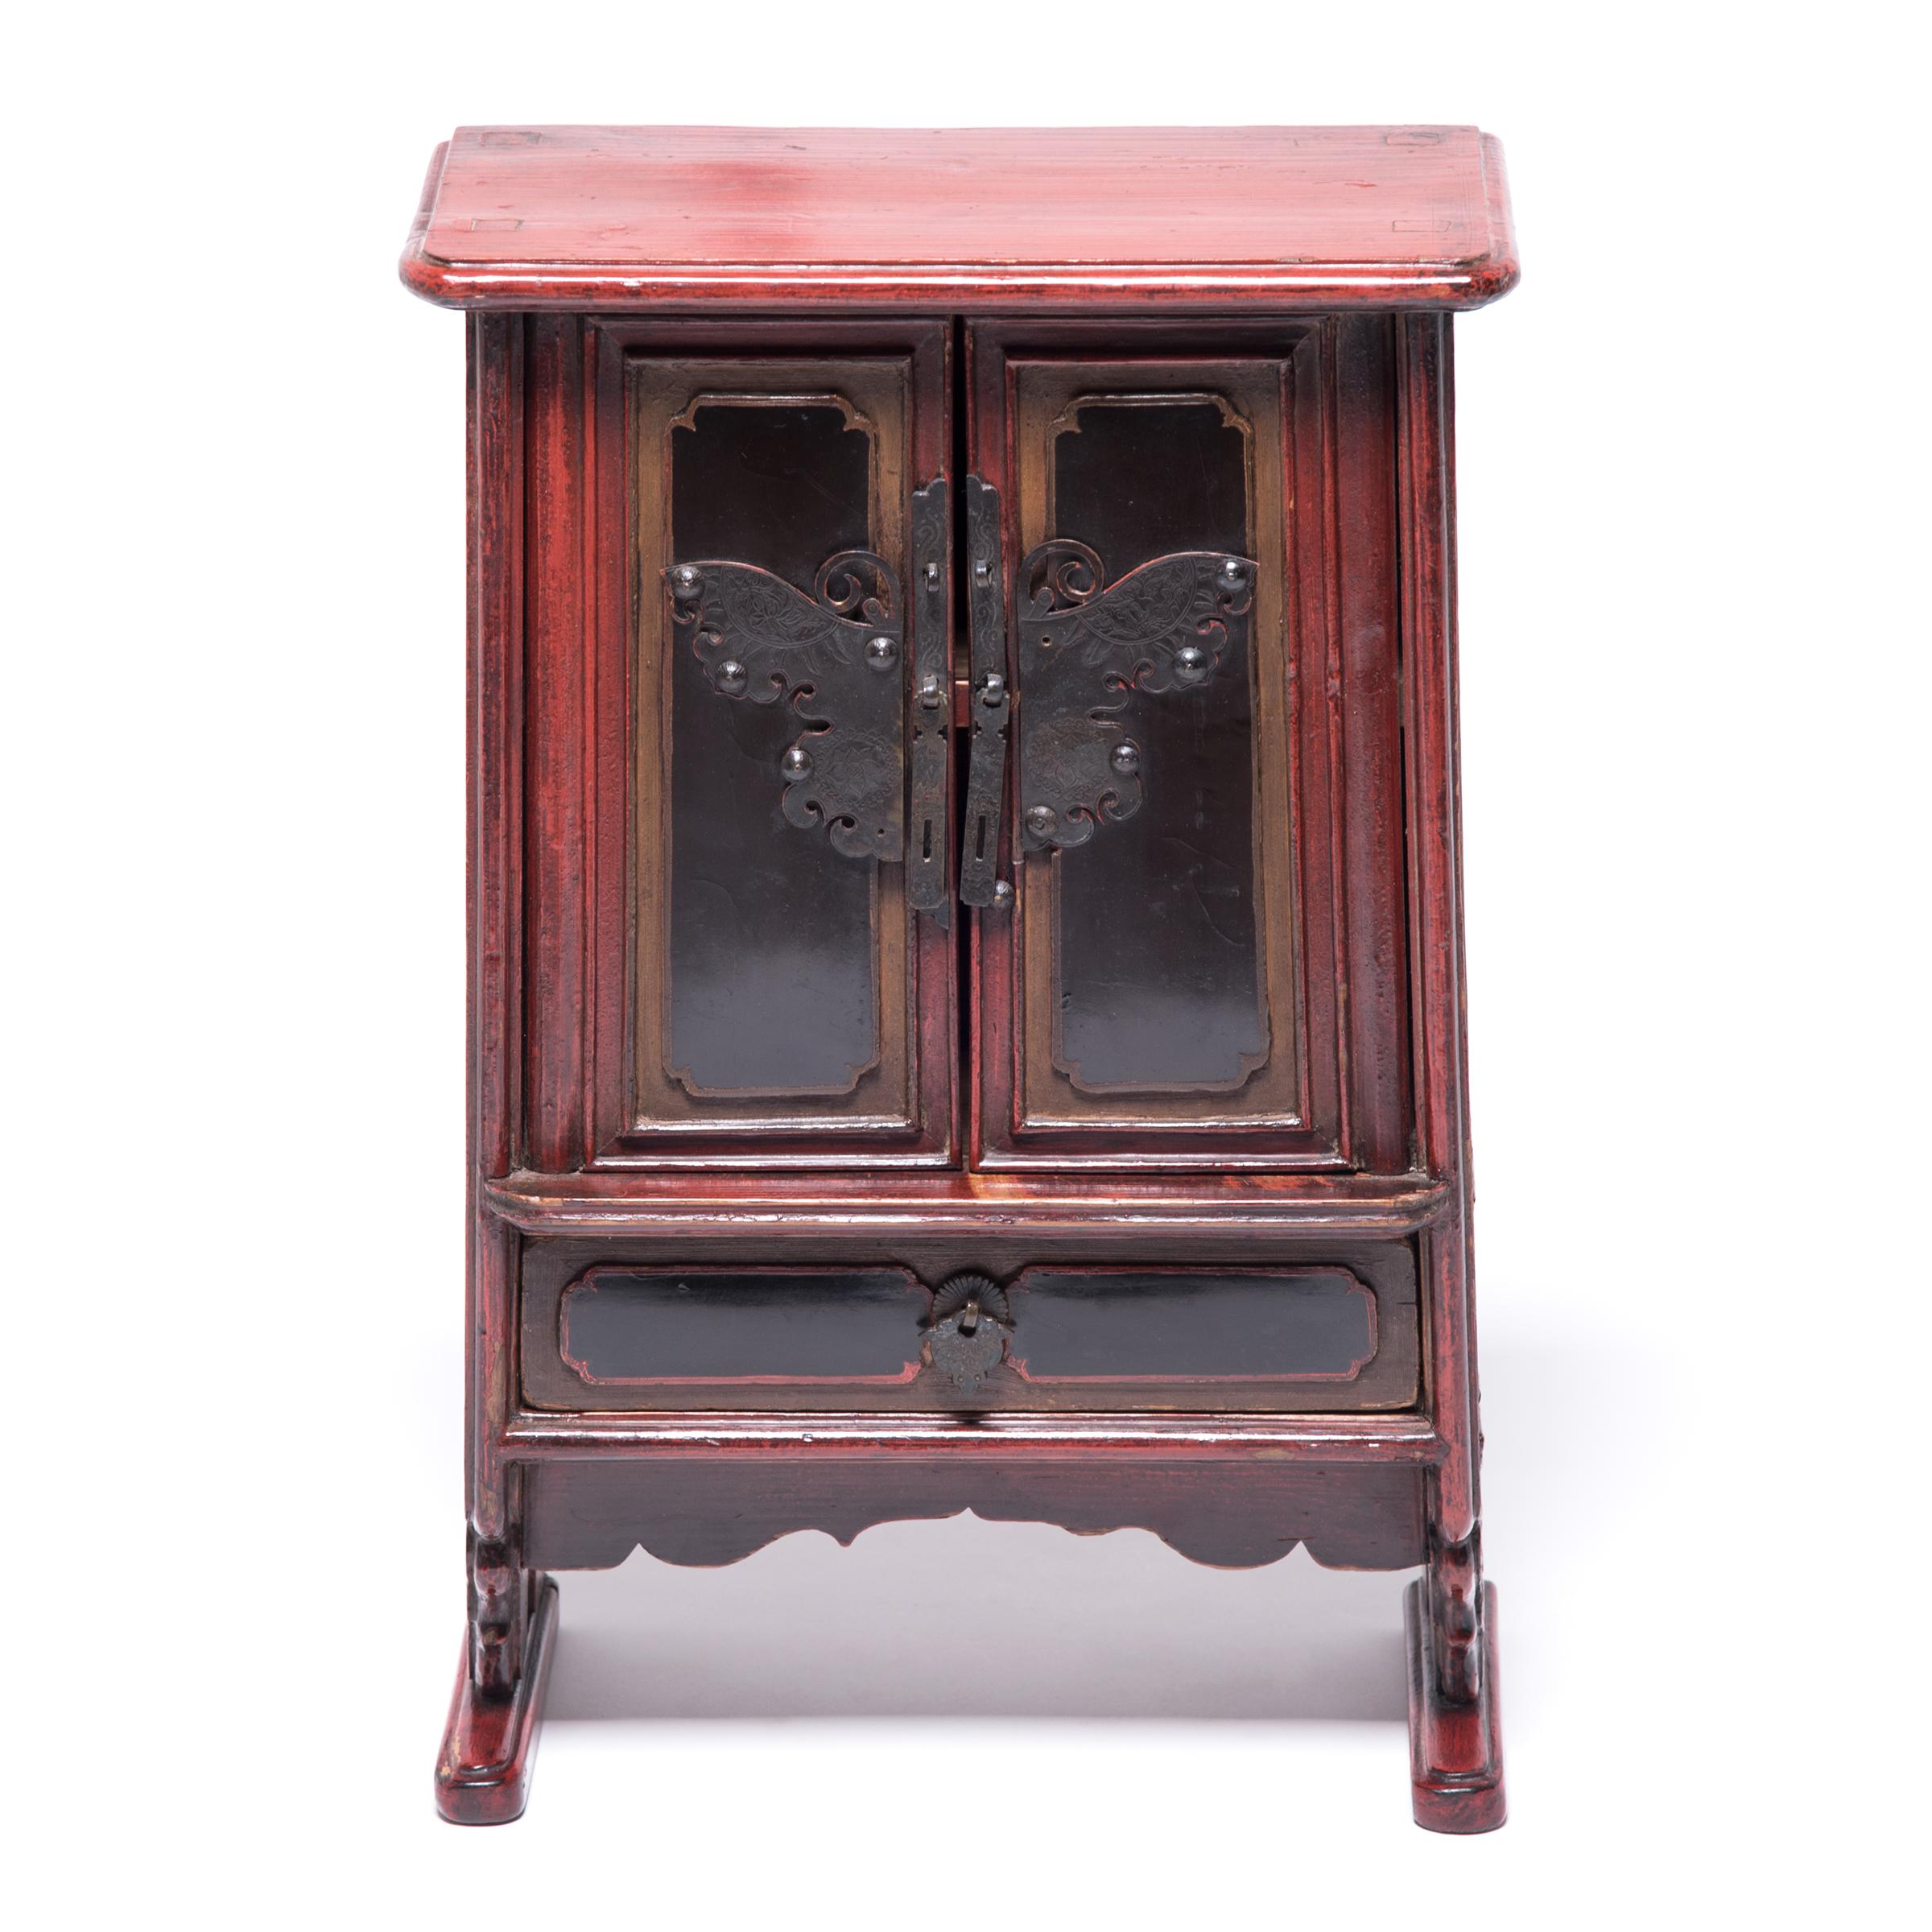 These late 19th century miniature tapered cabinets would have been kept in a woman's quarters, likely used as a jewelry box or cosmetics case. The carved door fronts are decorated with etched brass hardware in the shape of a butterfly, symbols of